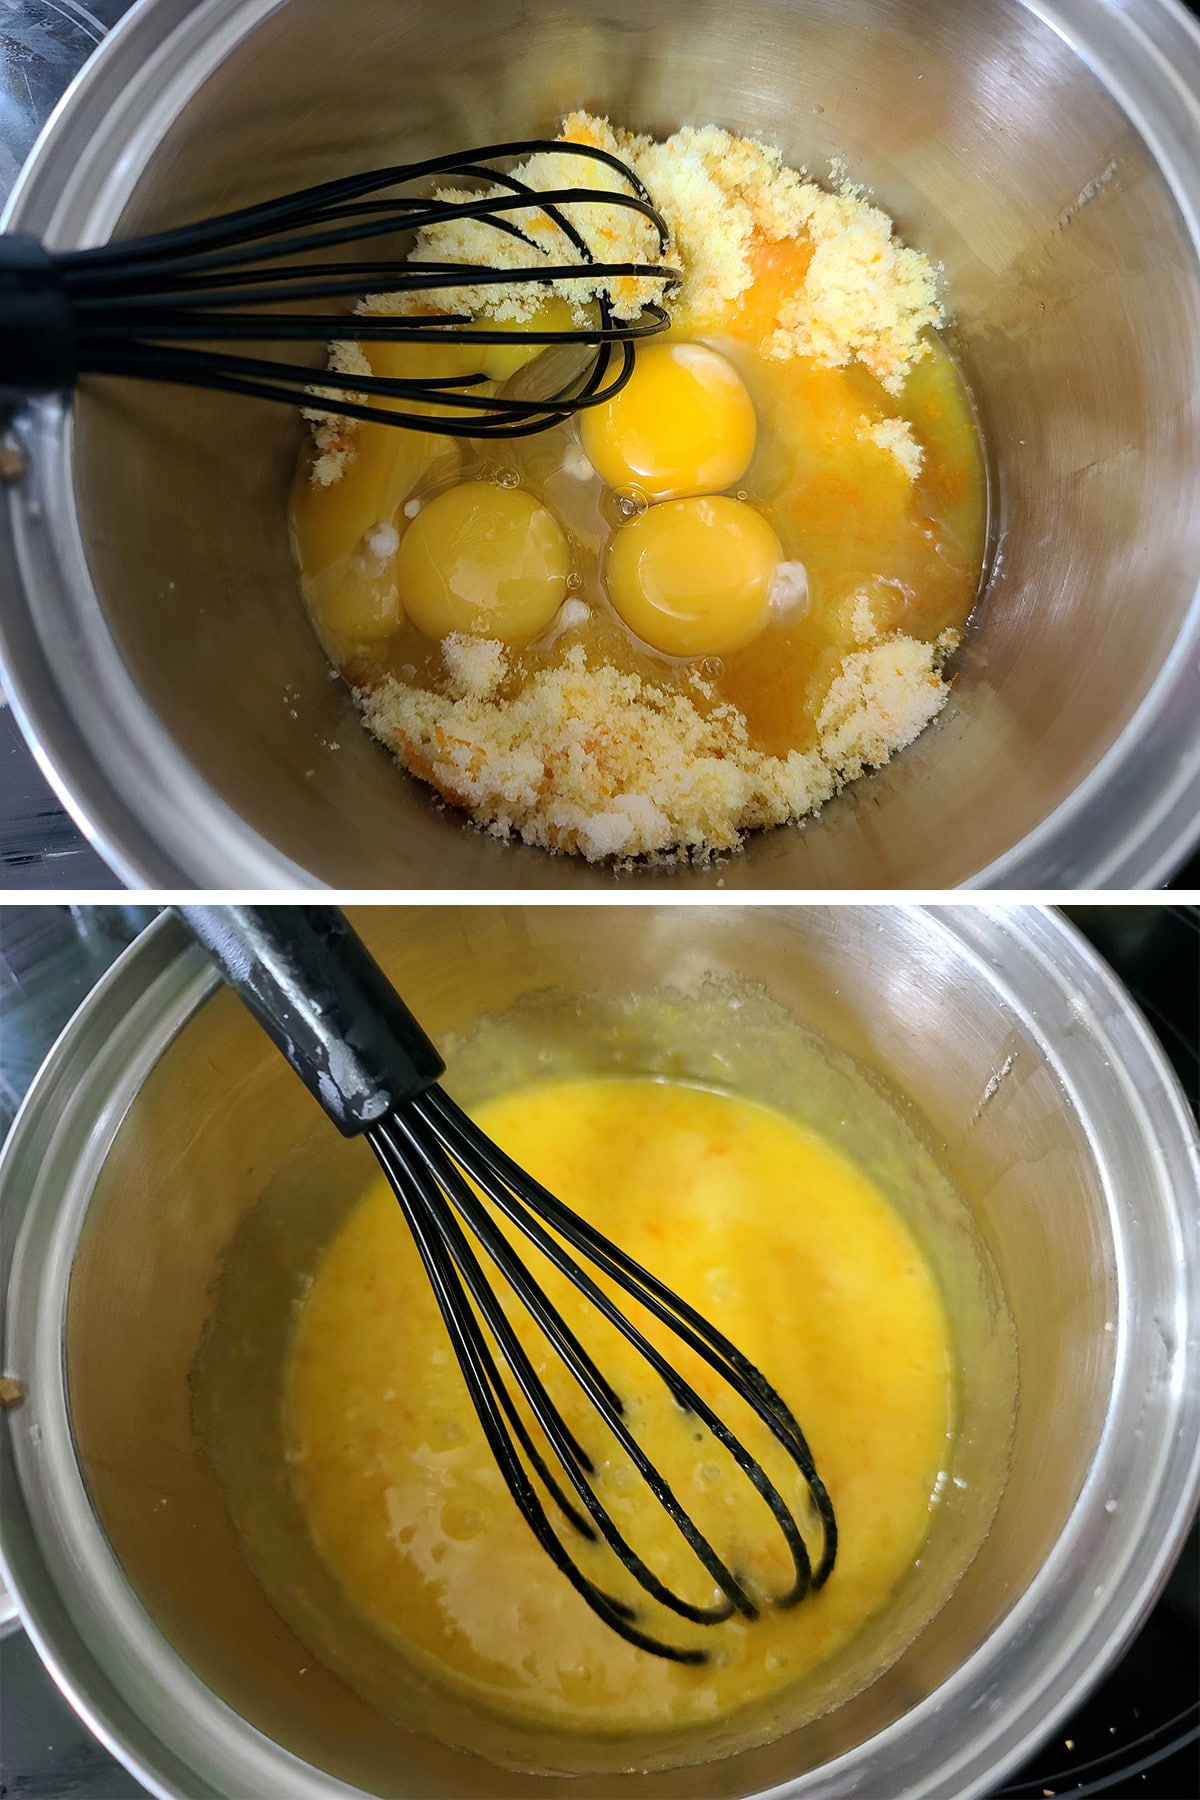 Zest, sugar, and eggs being whisked together in a pot.